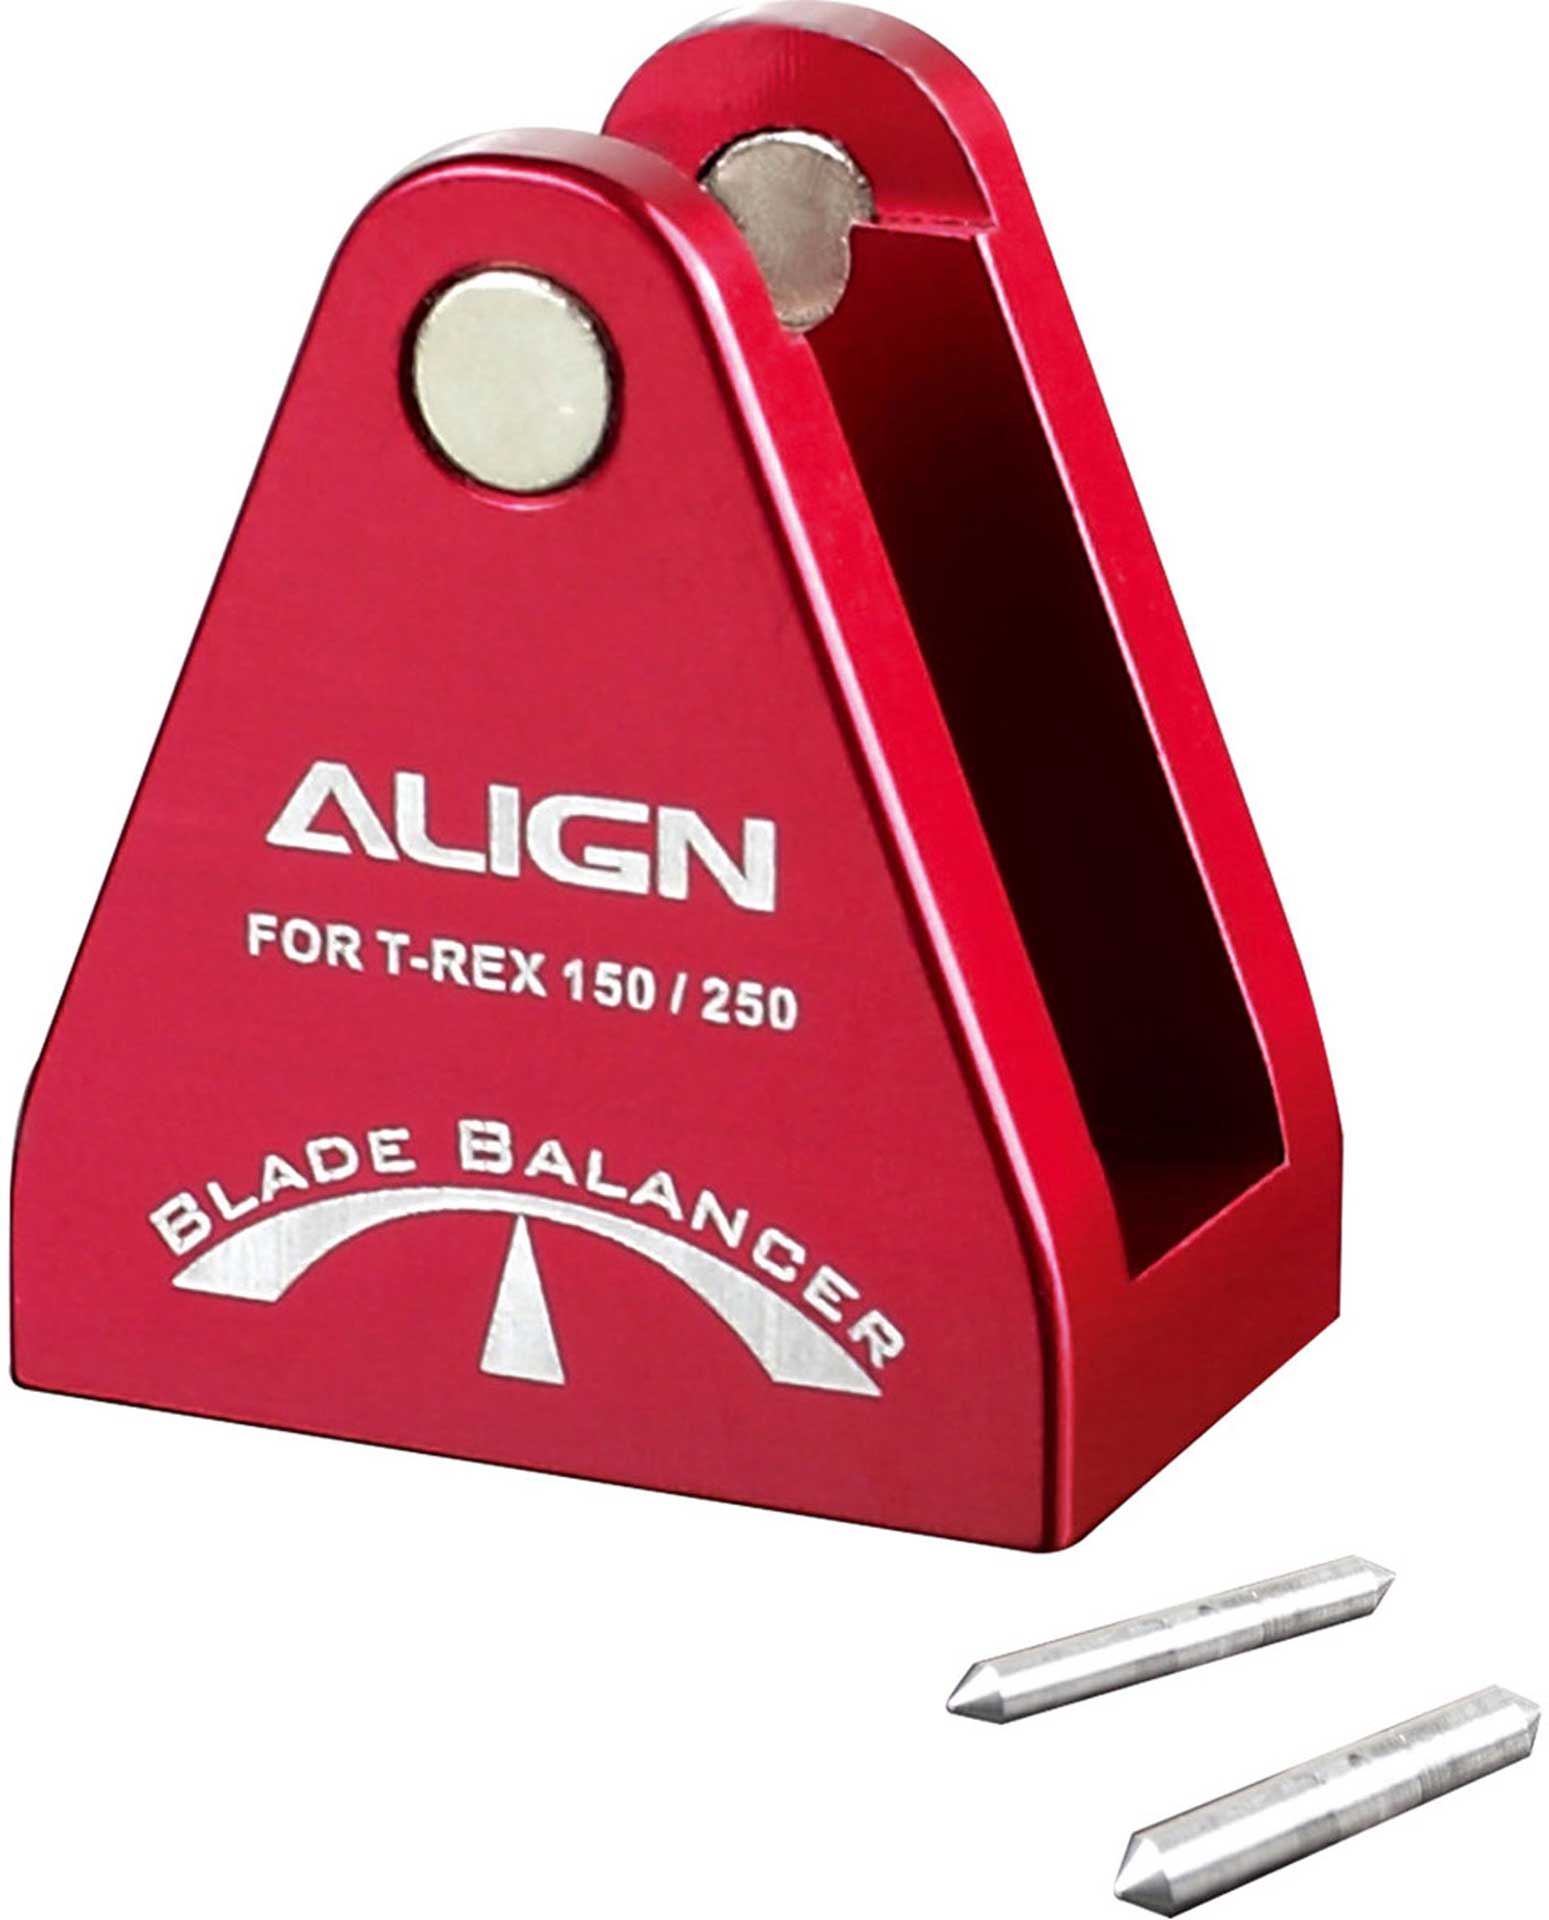 ALIGN ROTOR BLADES SCALE  FOR  T-REX 150/250